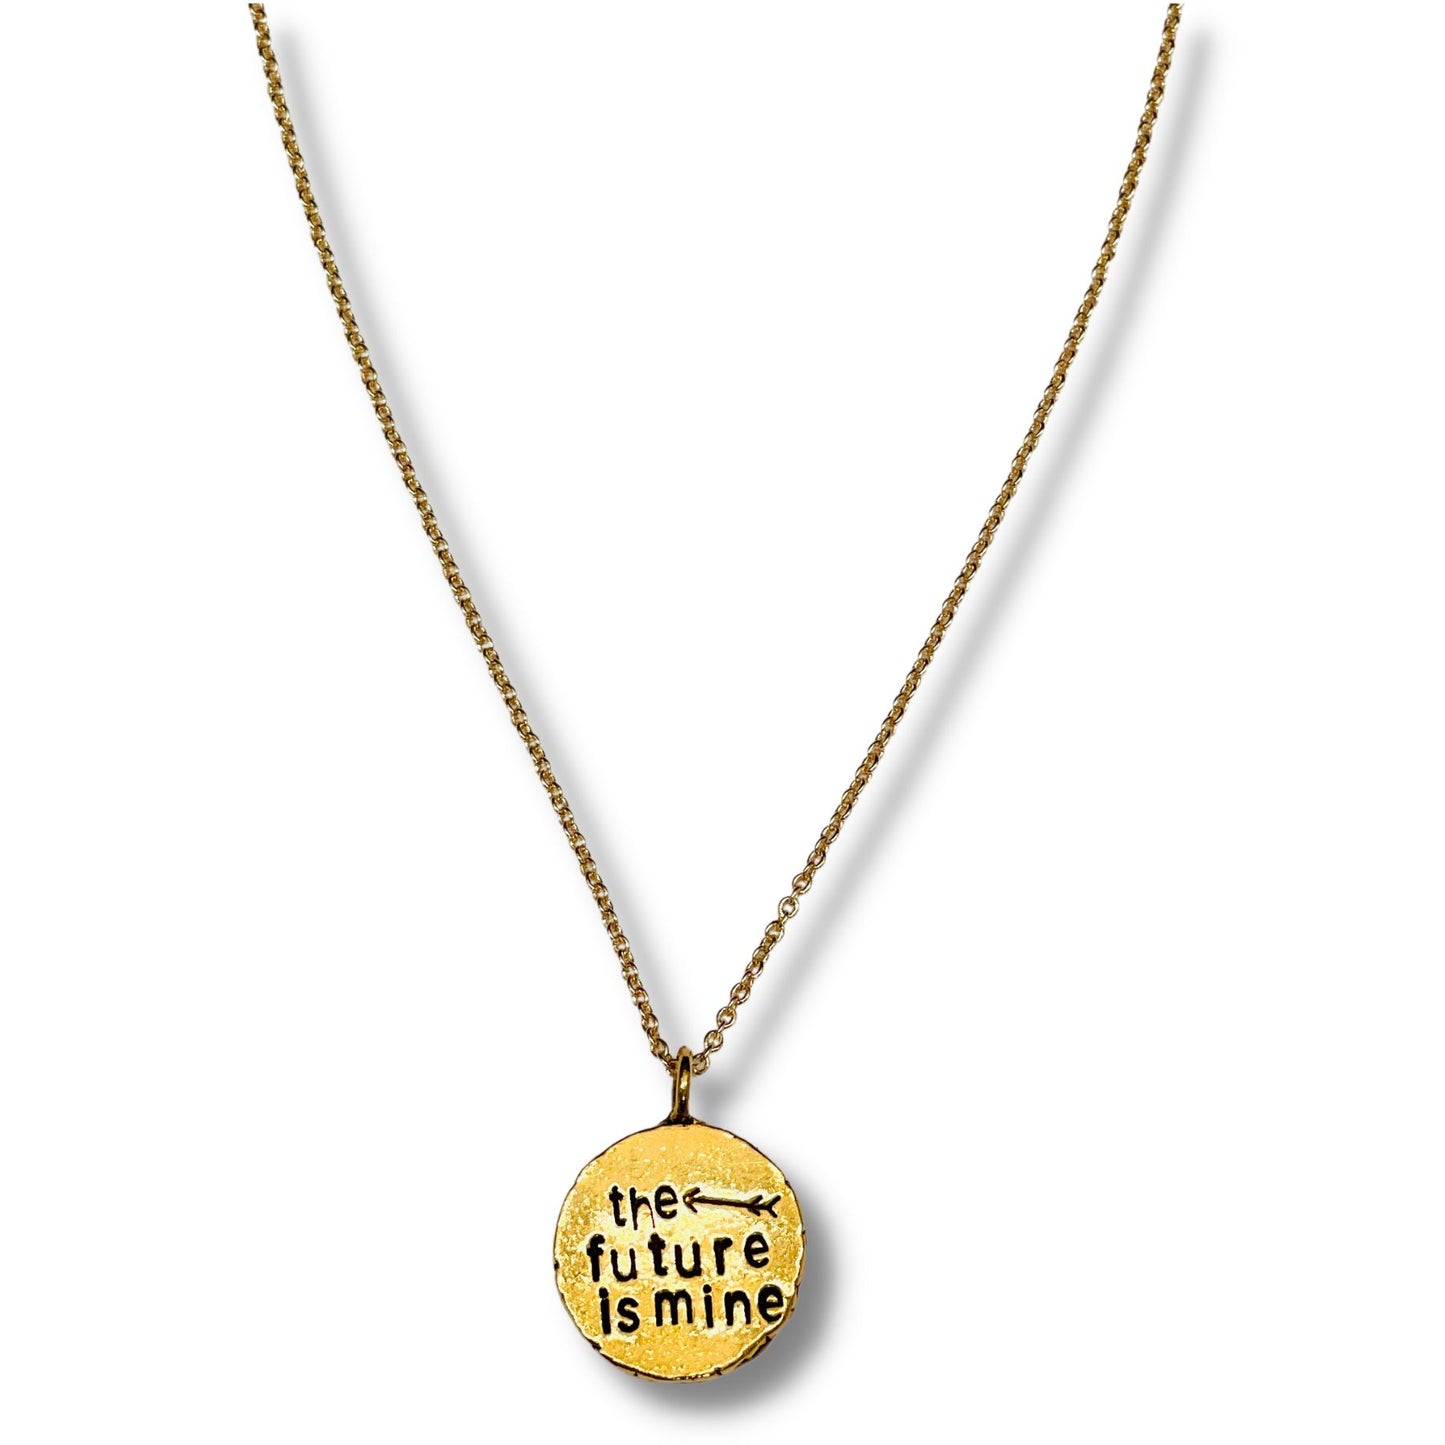 The Future Is Mine Hand Stamped Pendant Necklace